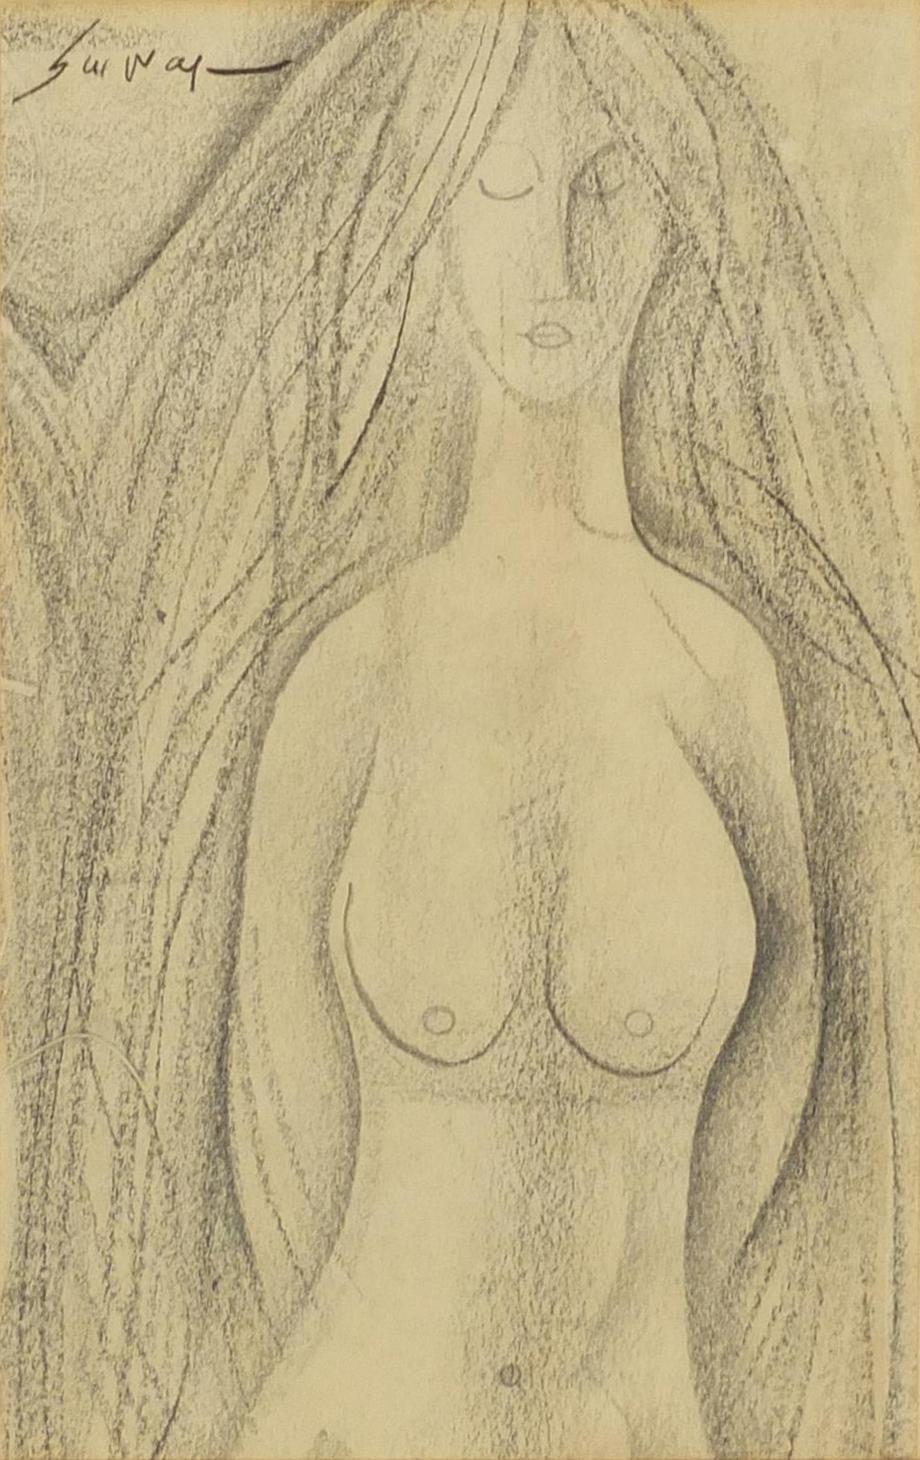 Surreal nude female top half portrait, pencil and chalk on paper, framed, 24cm x 15.5cm : For